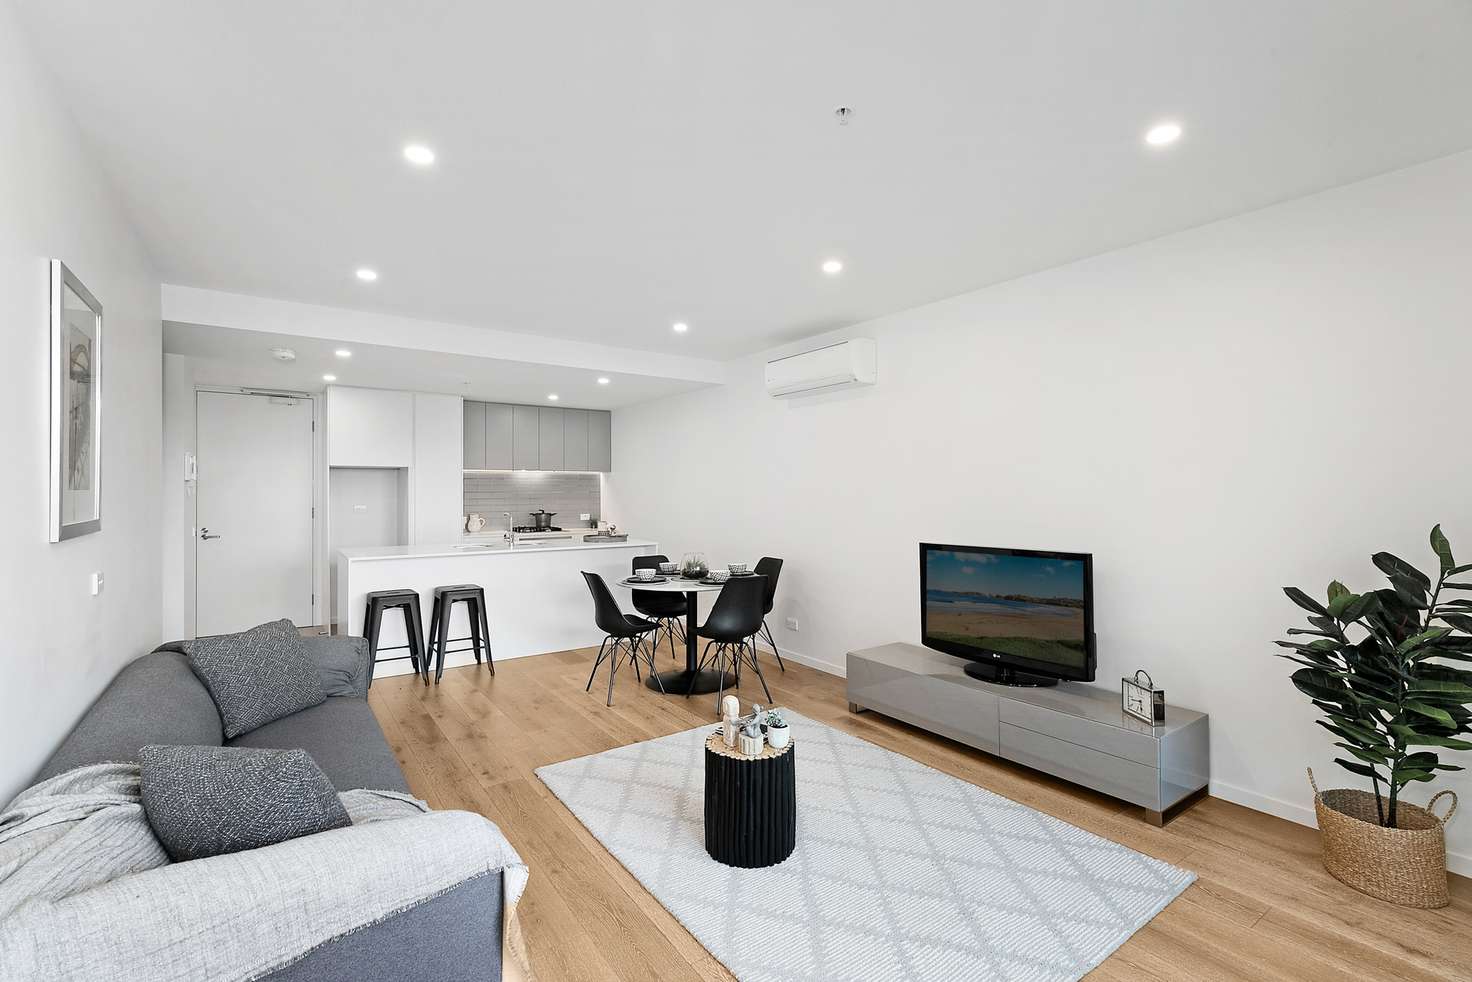 Main view of Homely apartment listing, 112/146 Bellerine Street, Geelong VIC 3220